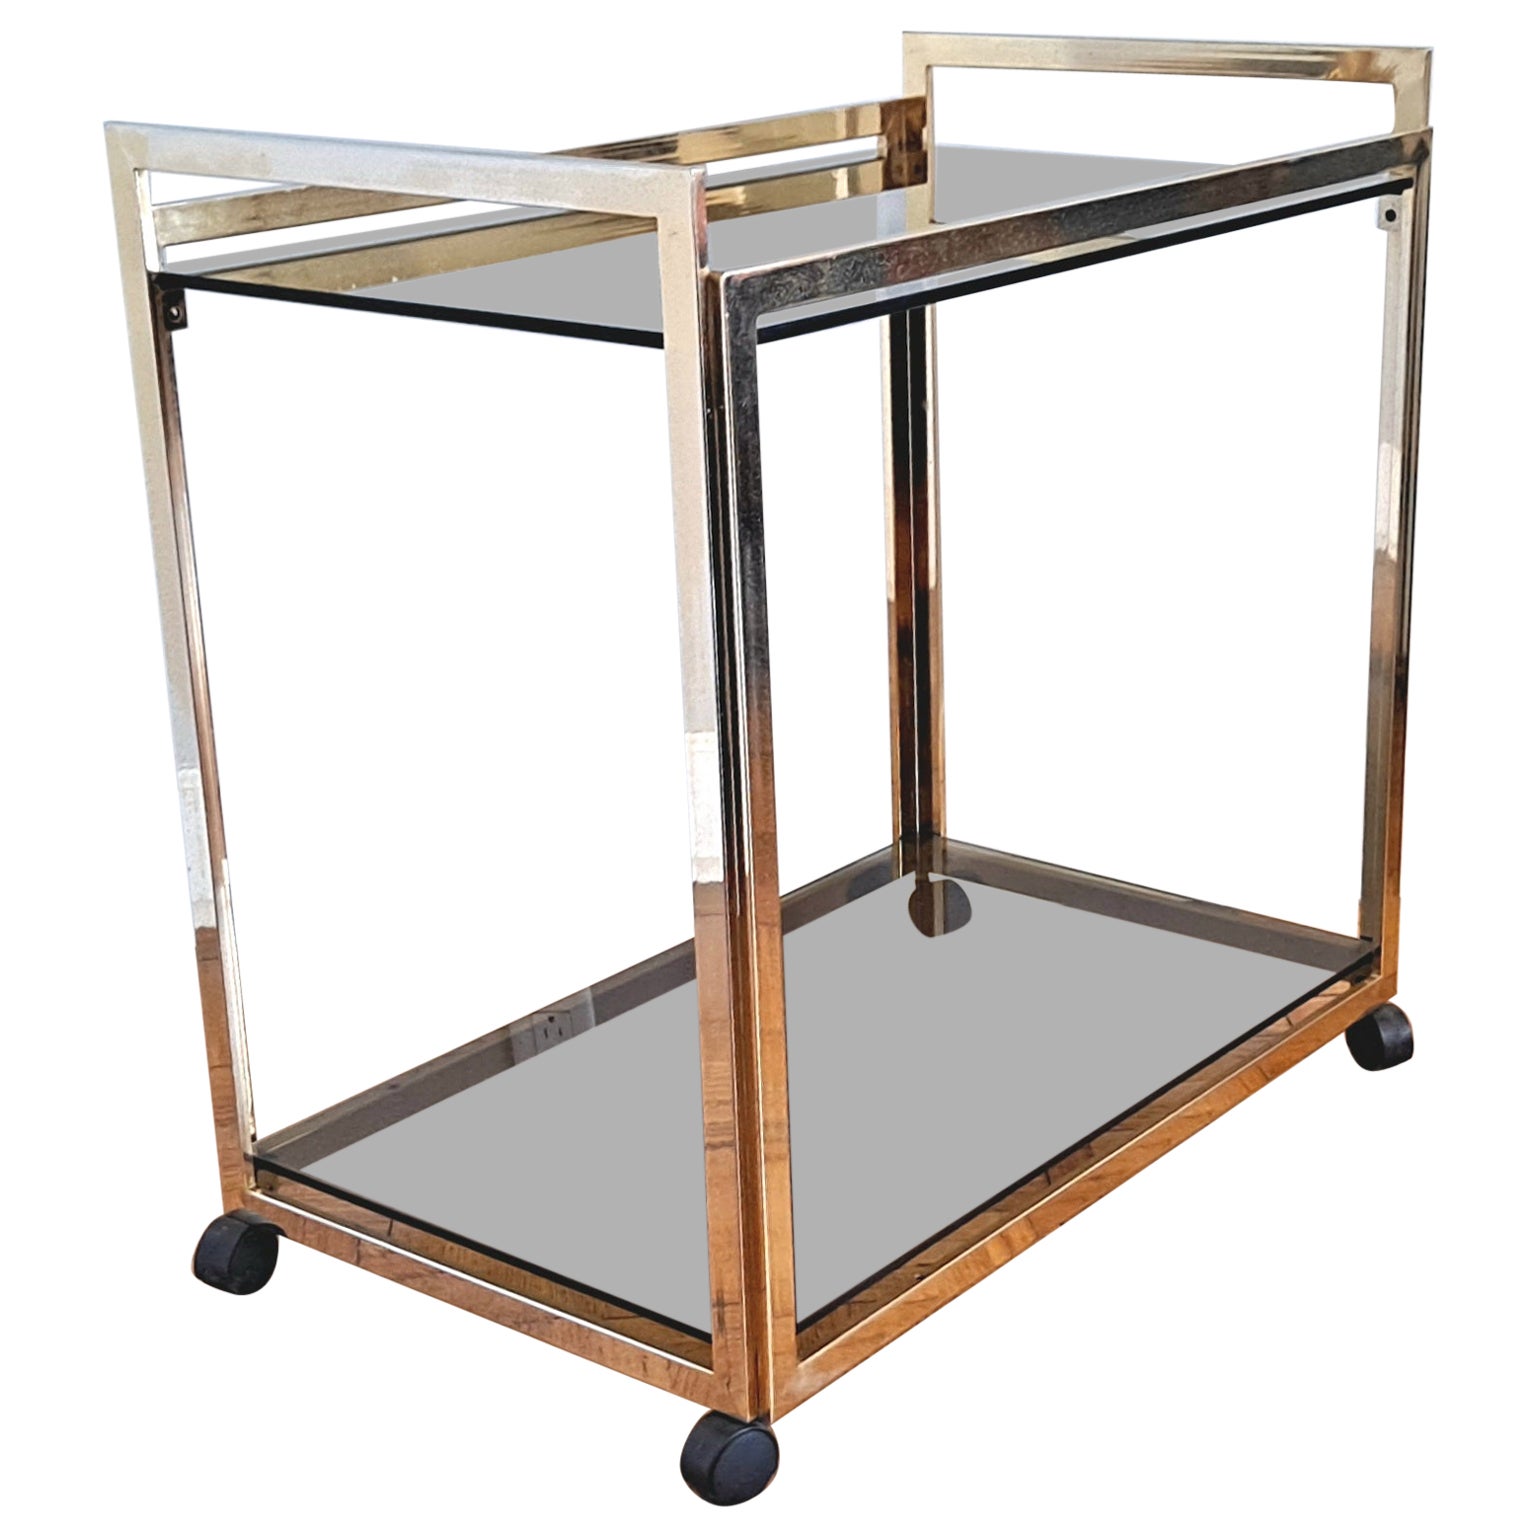  Italian Brass Dry Bar Cart - Serving Tray For Sale